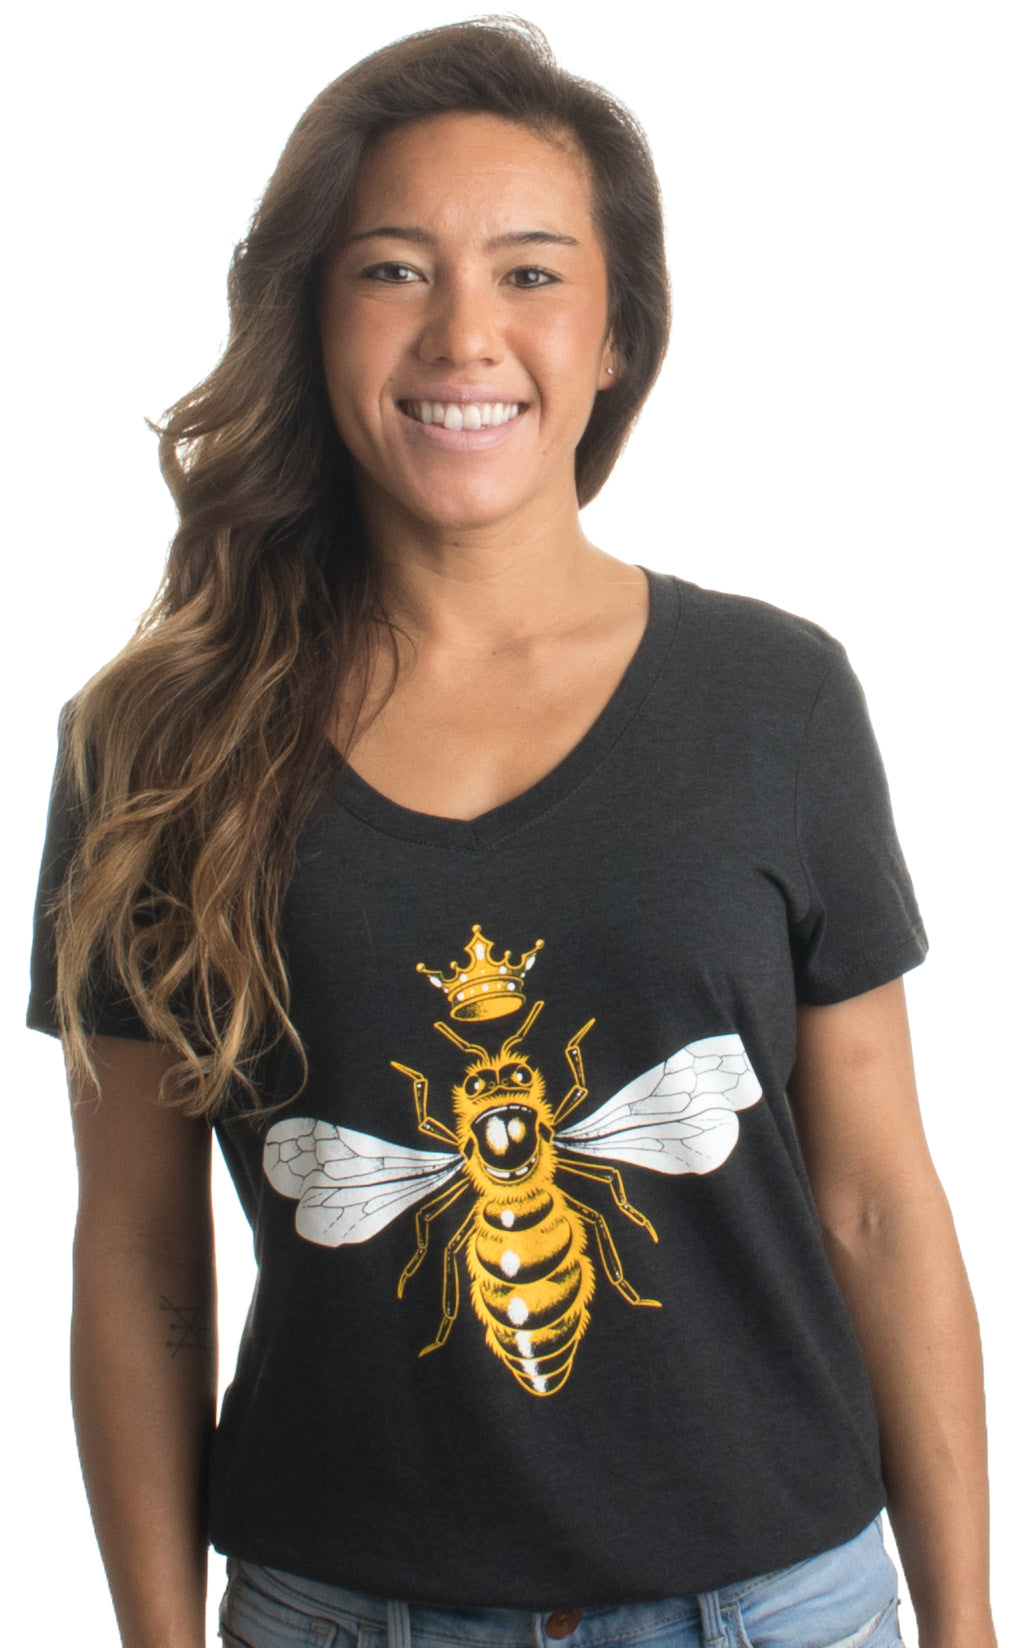 Queen Bee | Funny, Cute, Cool Boss Lady Crown Alpha Top,  Women's V-neck T-shirt